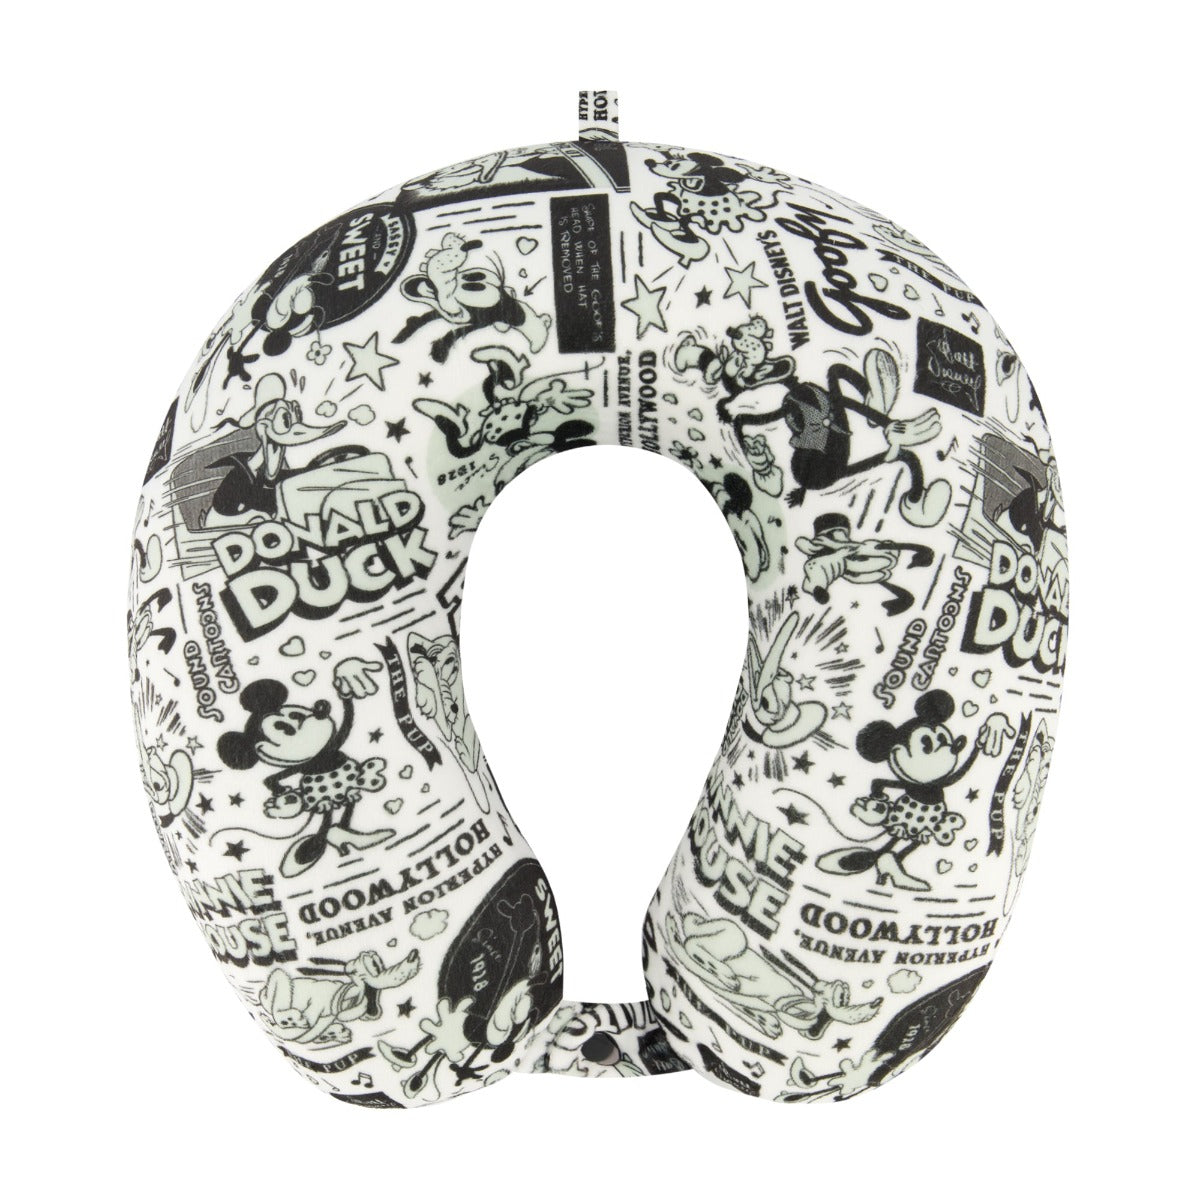 Ful Disney 100 year anniversary characters all over black and white travel neck pillow 